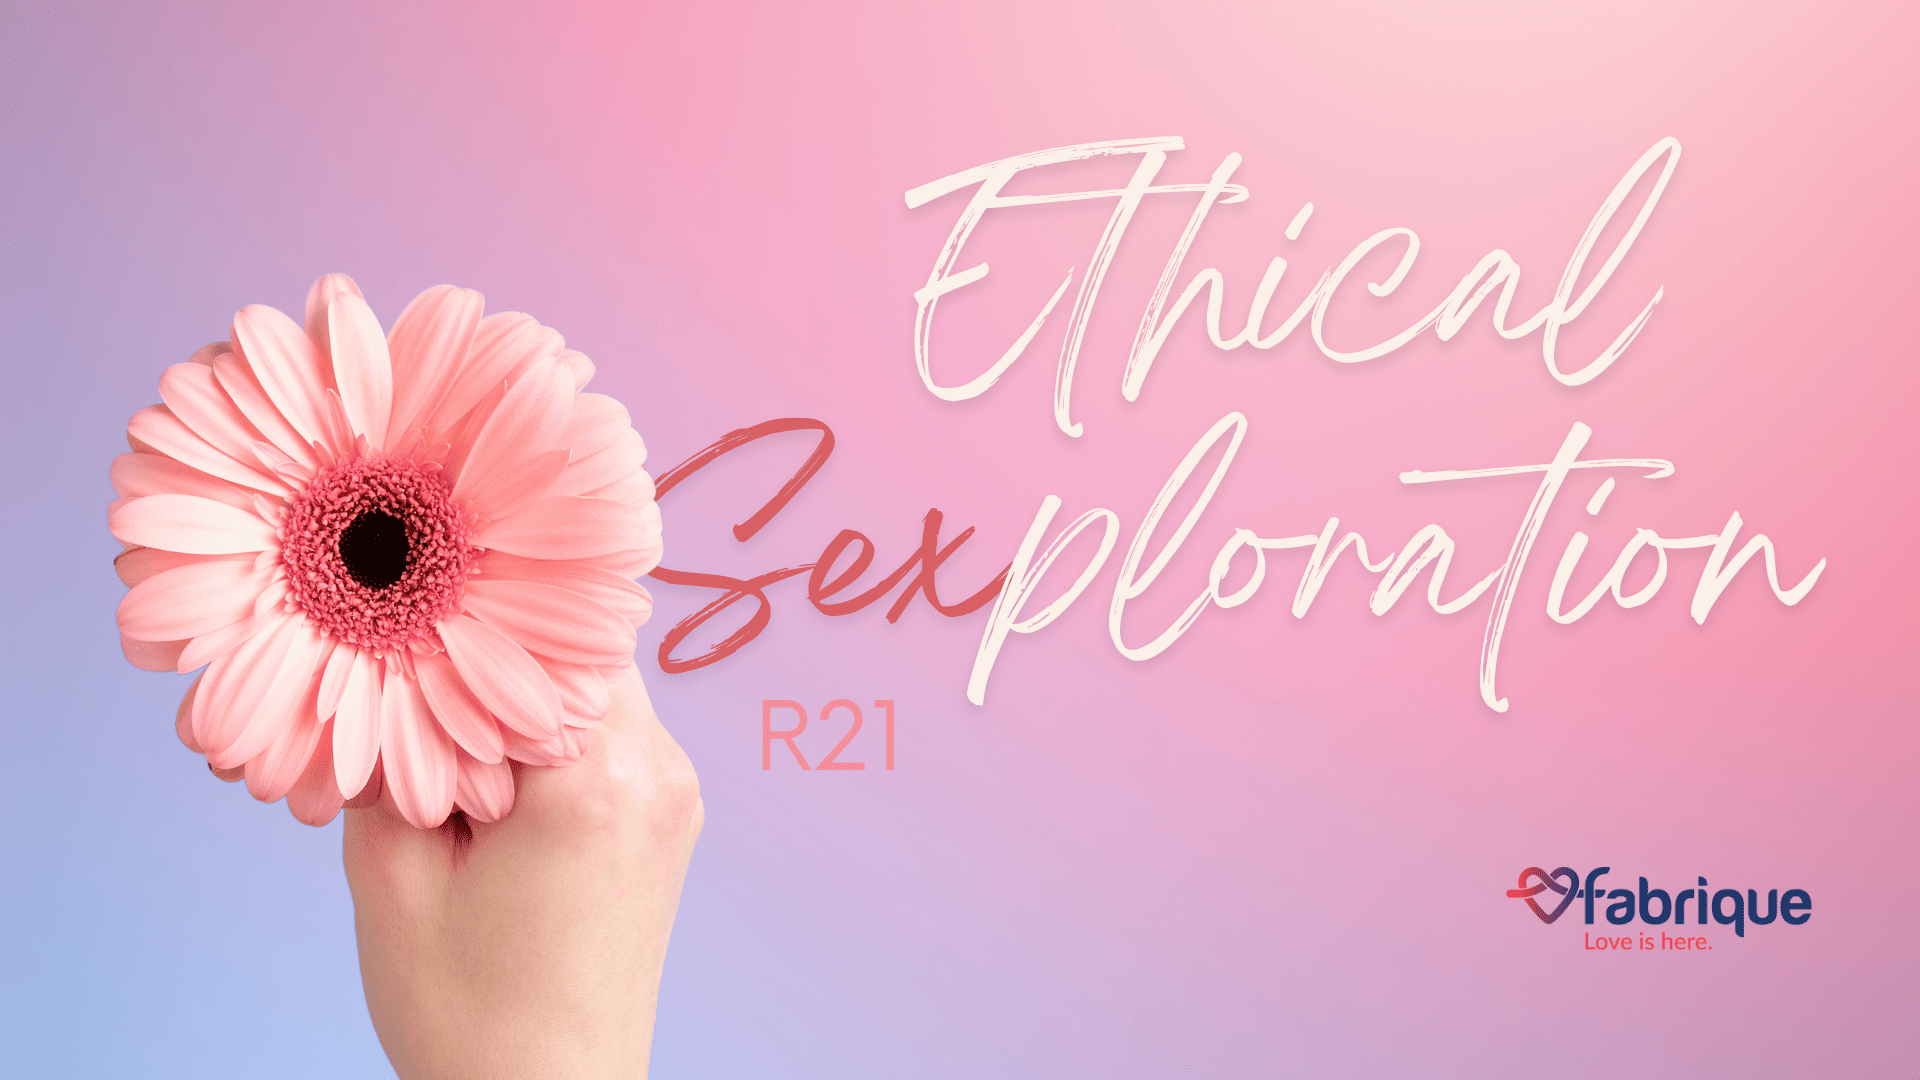 Ethical sex-ploration banner